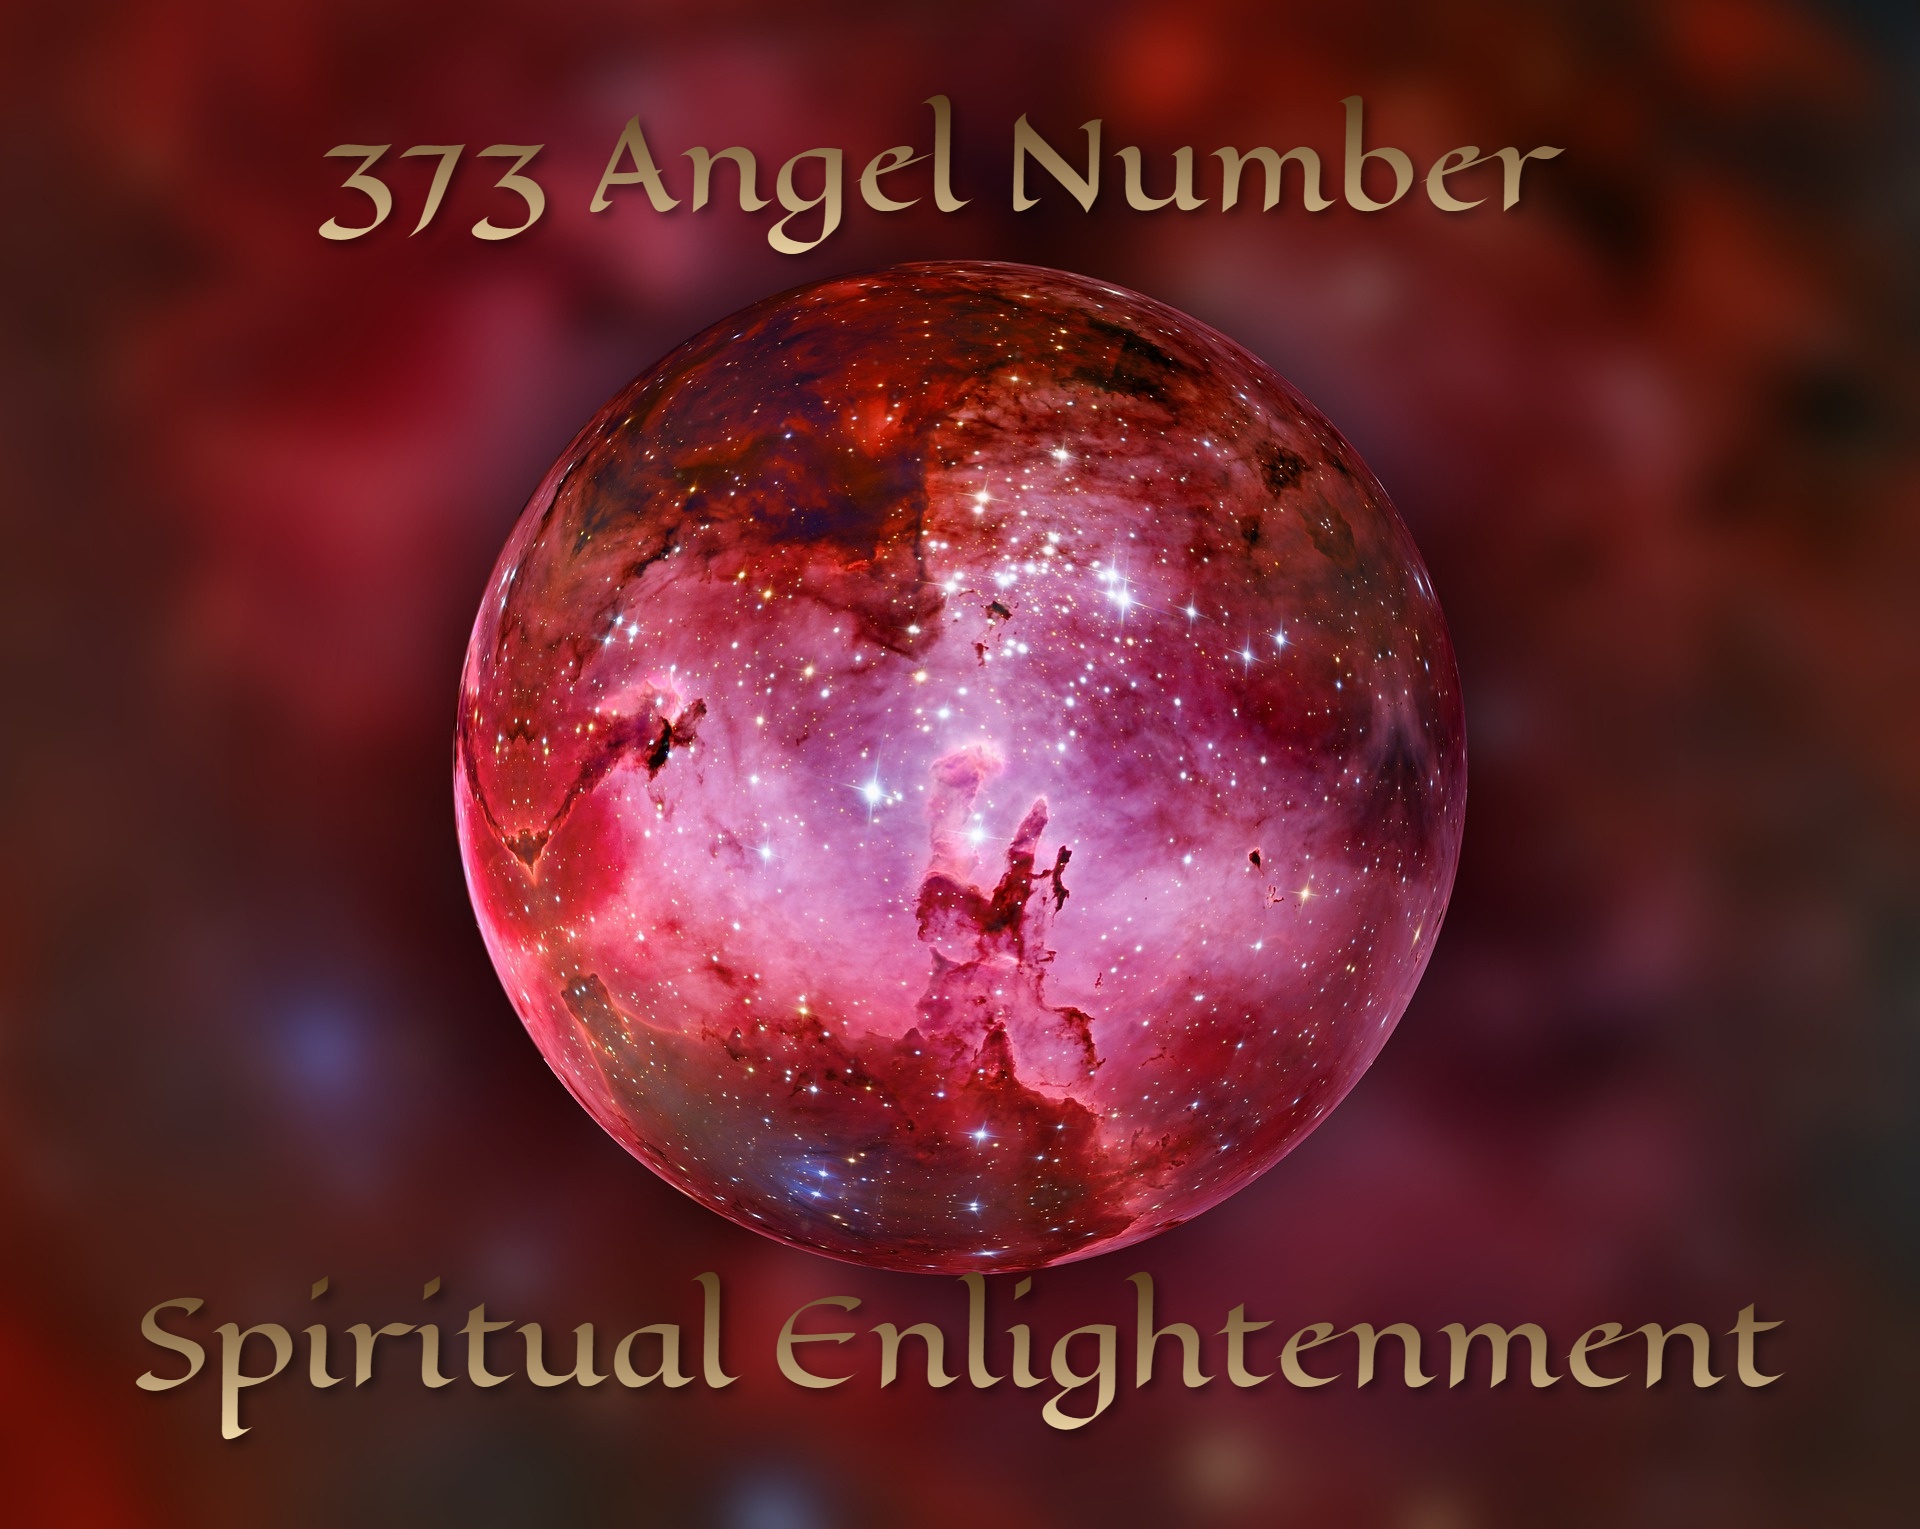 373 Angel Number Meaning - Spiritual Enlightenment